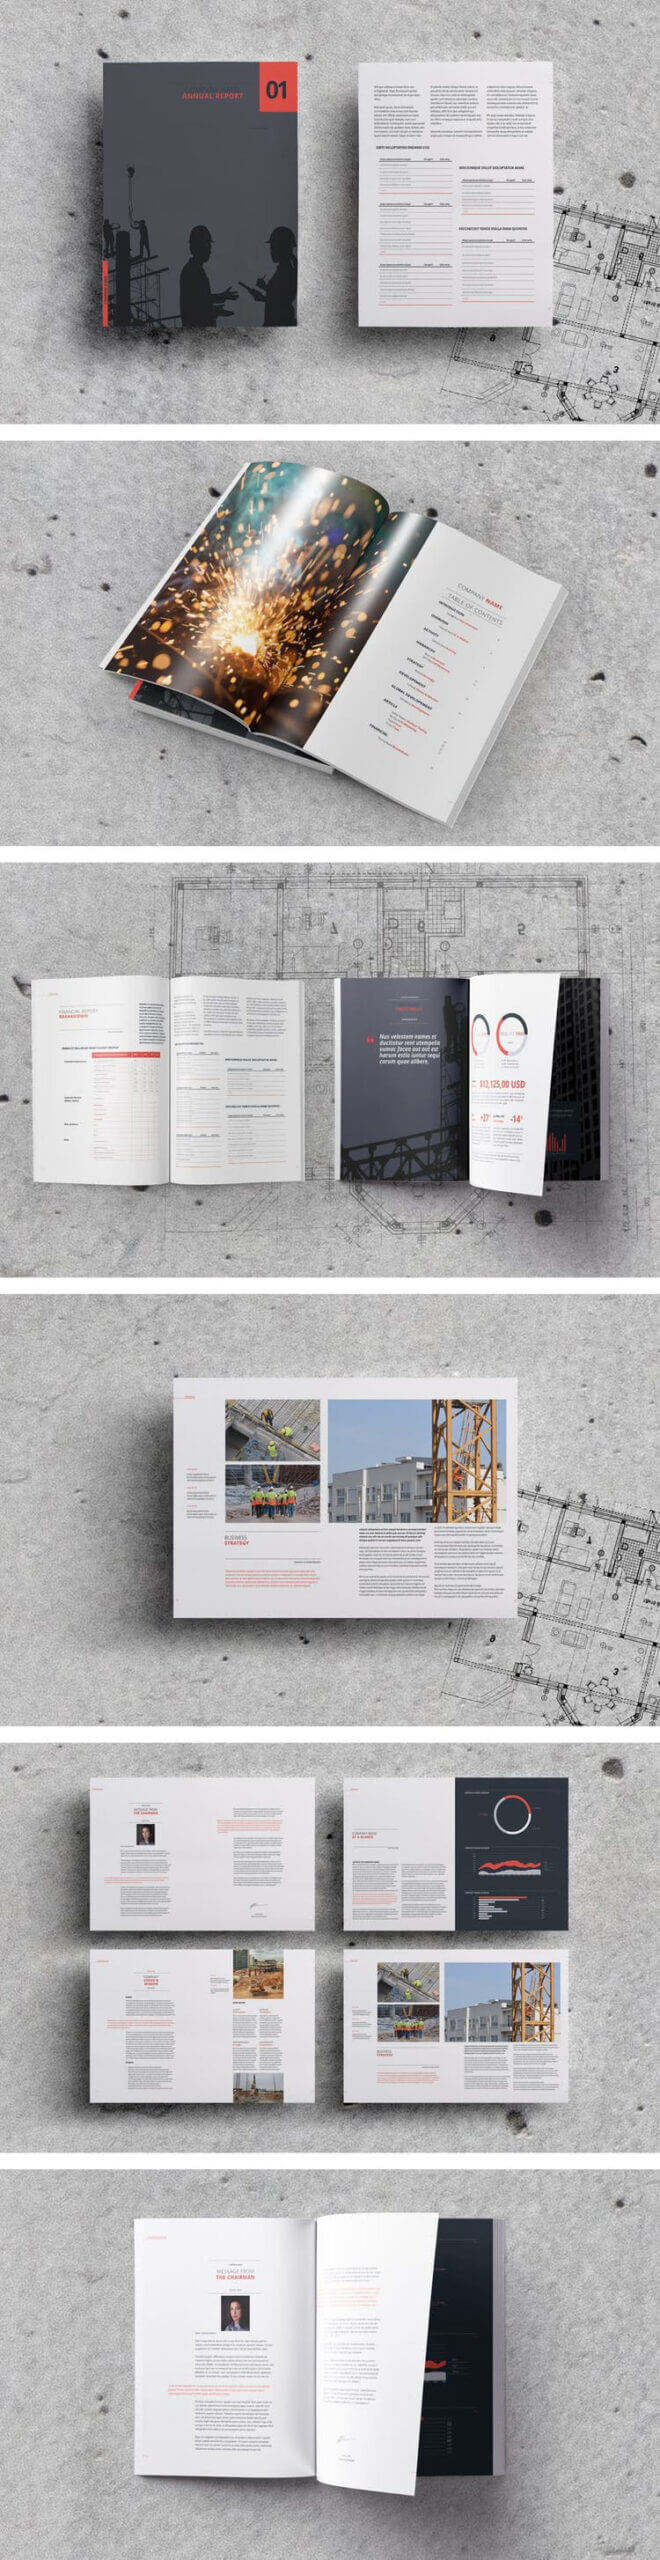 75 Fresh Indesign Templates And Where To Find More Throughout Free Annual Report Template Indesign